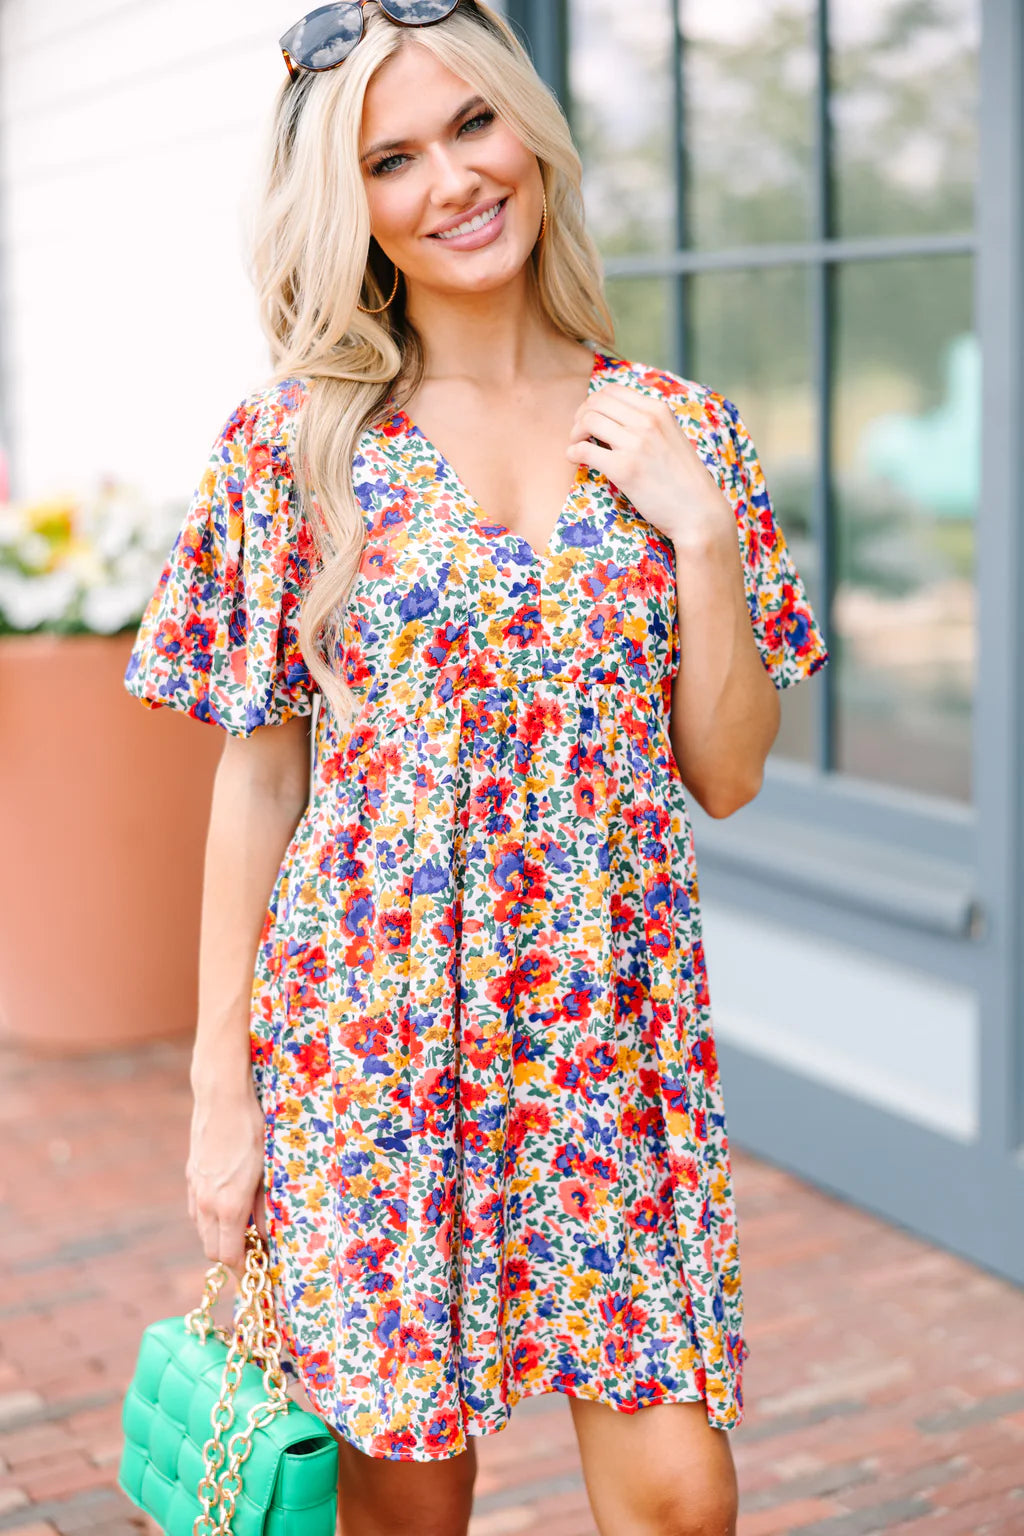 Dressy Rompers, Lace Rompers, Date Night Outfit Ideas, Women's